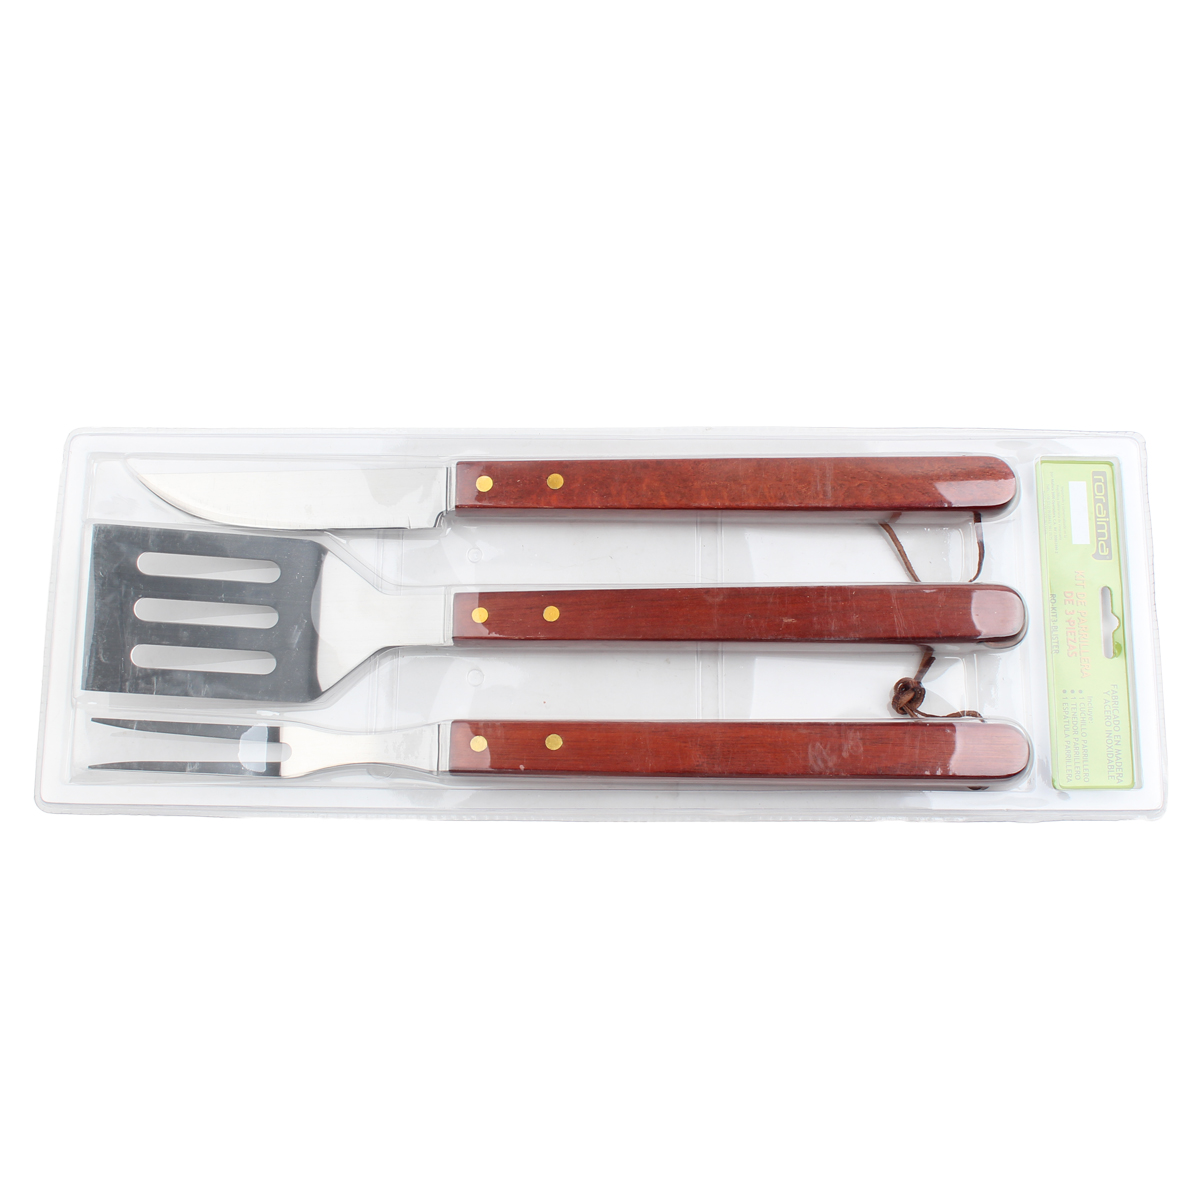 Triad of Wooden-handle BBQ Sets